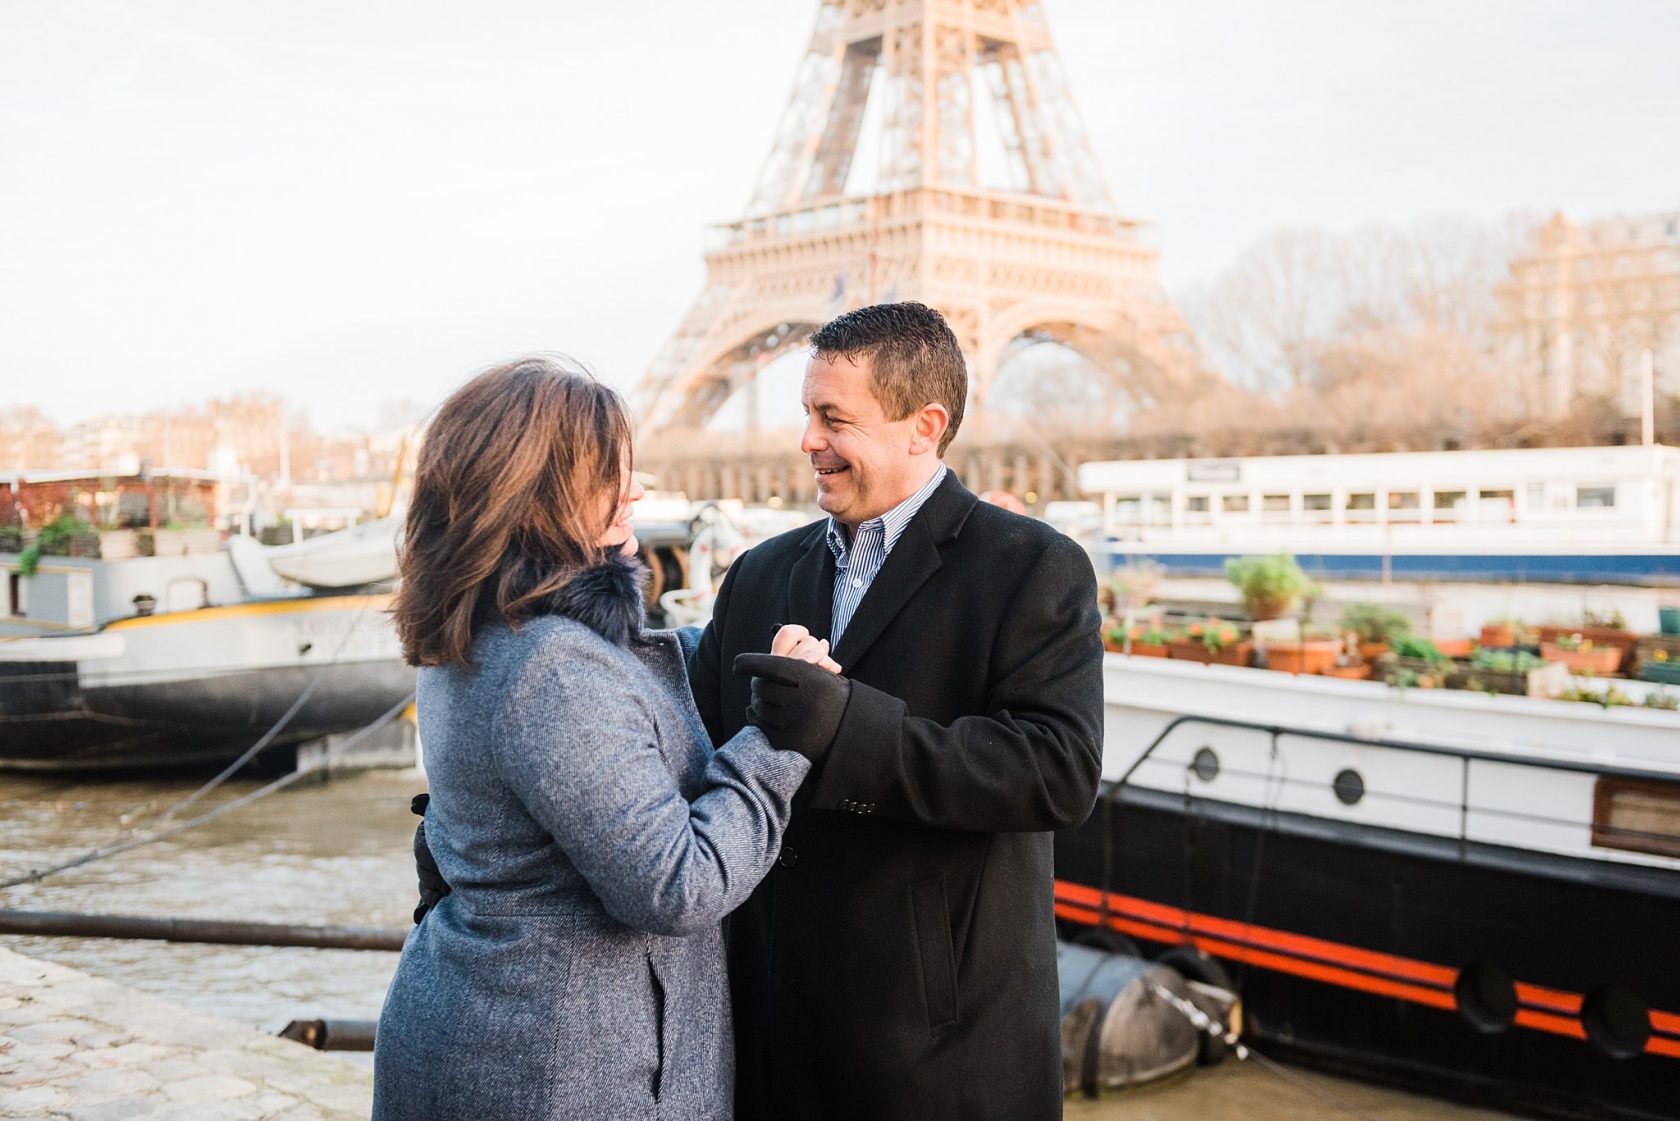 professional photography in paris france - couple dancing together by the seine river on an anniversary photoshoot